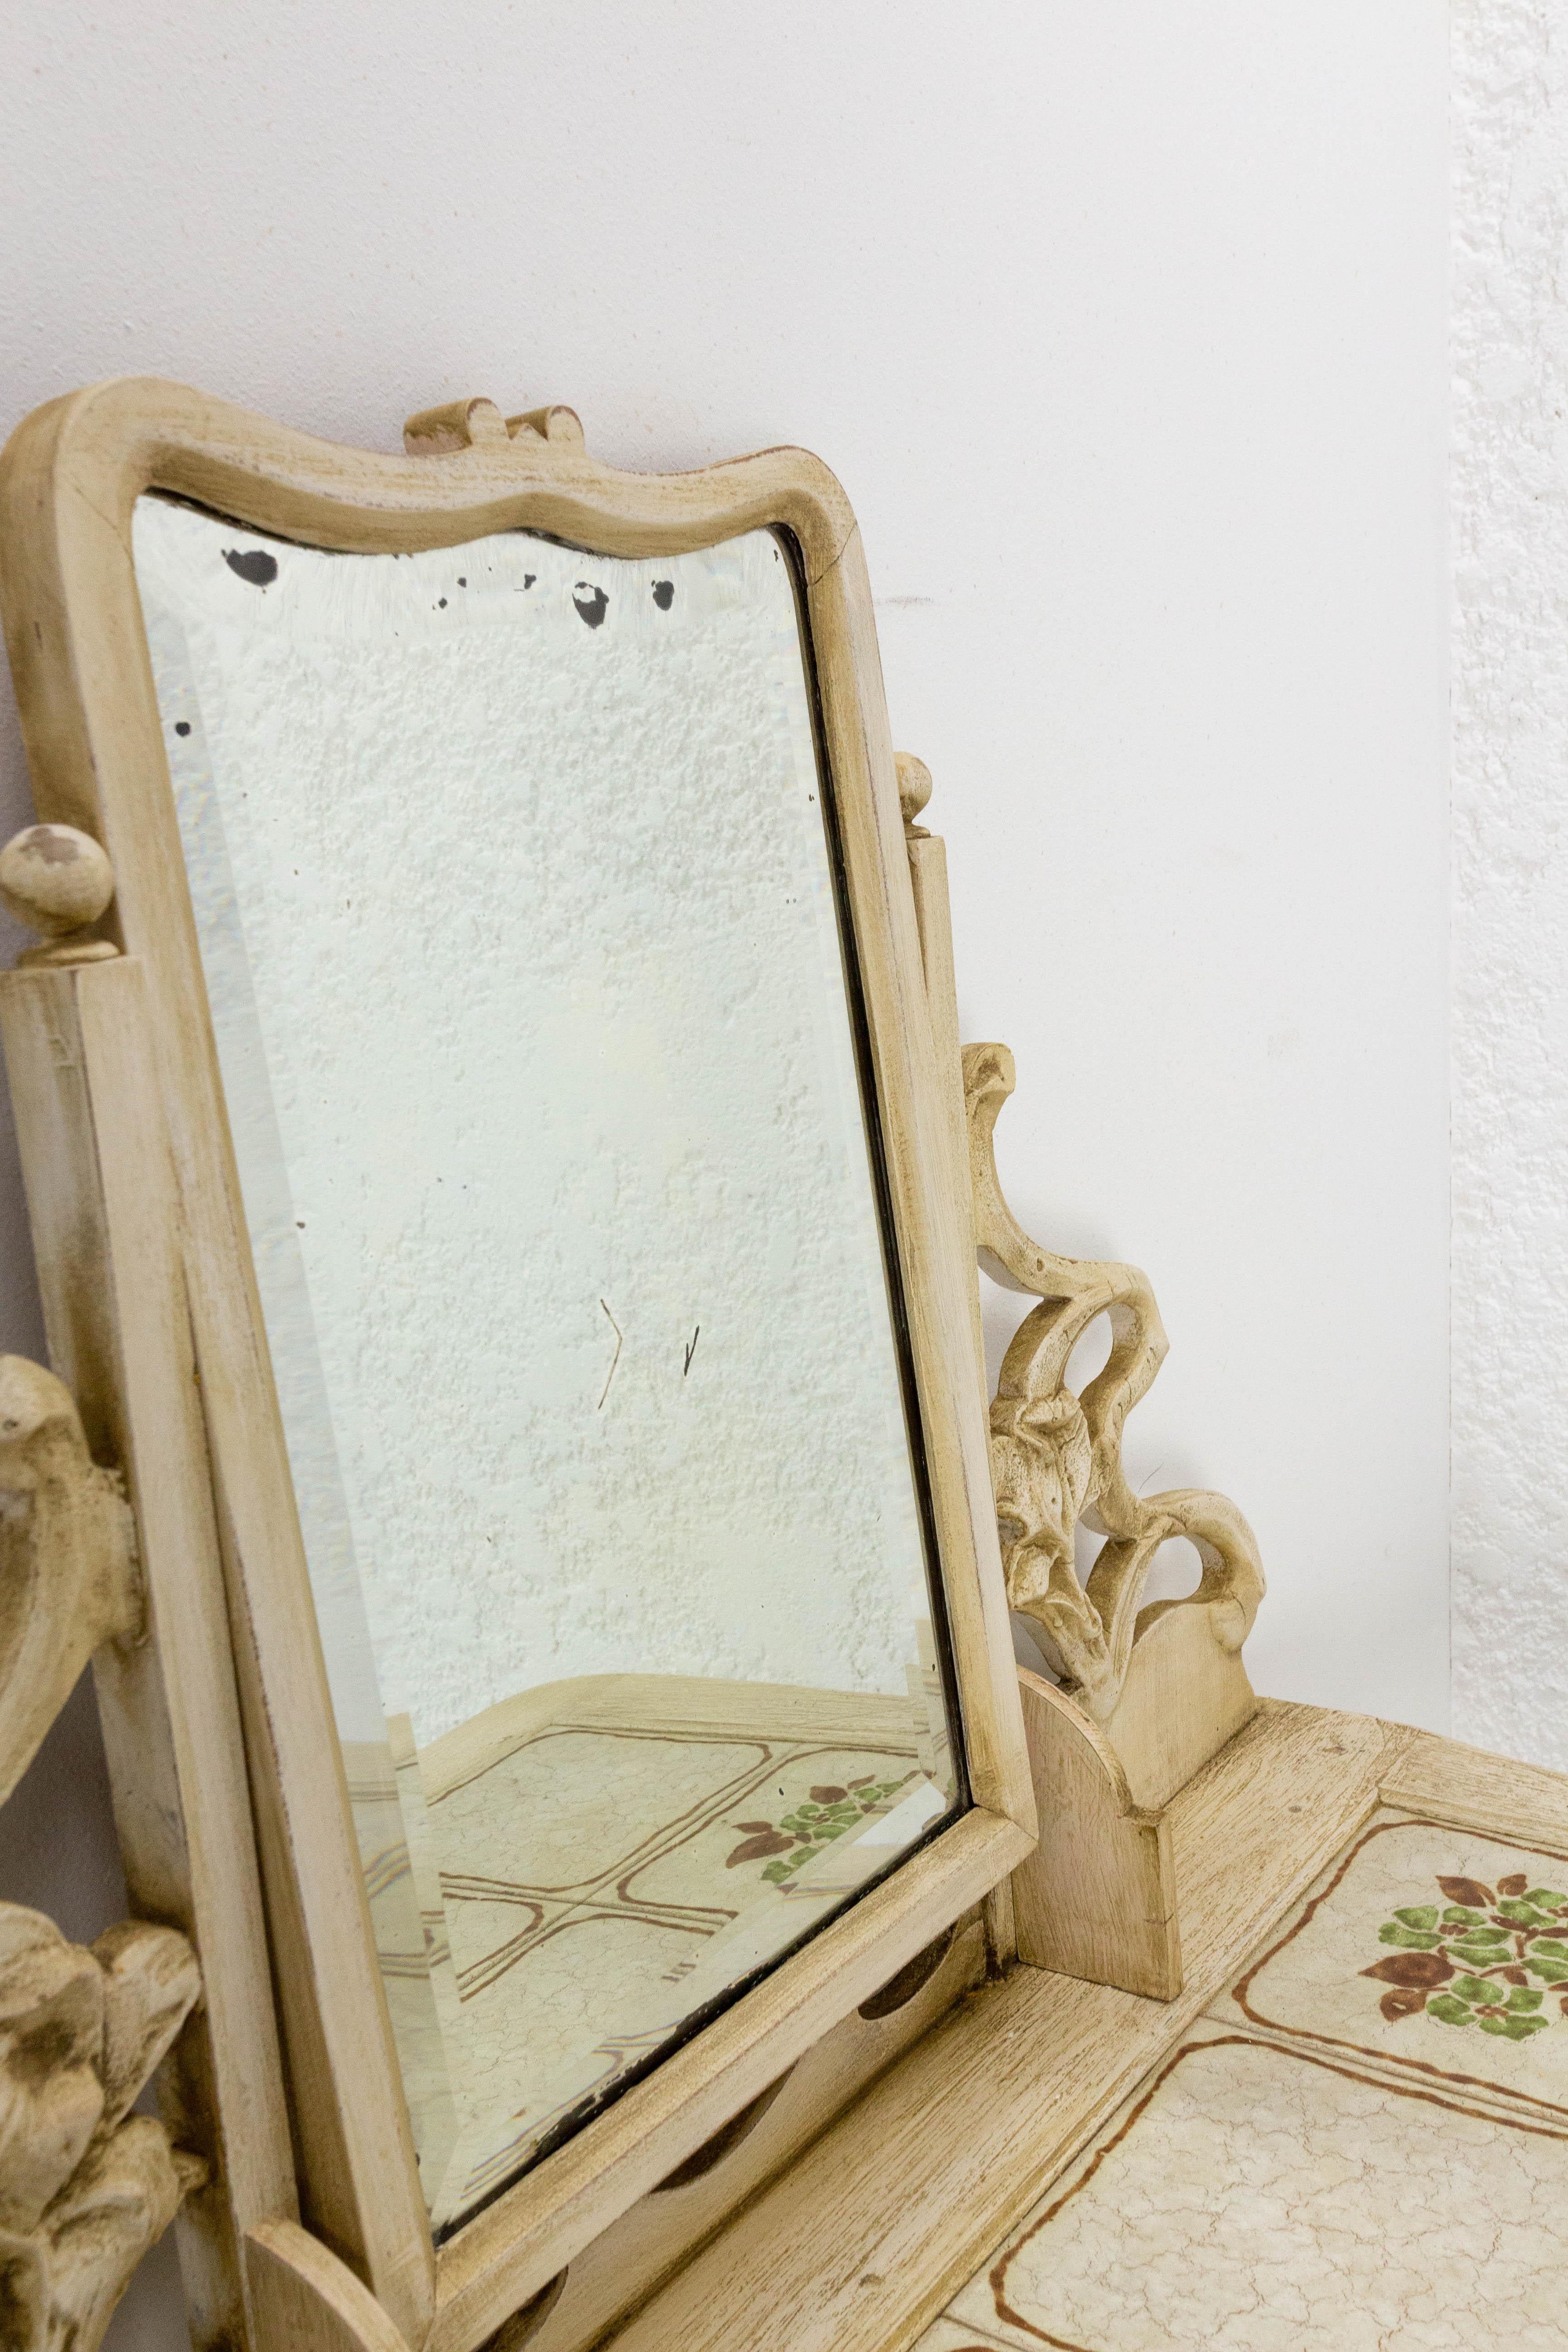 French Art Nouveau Dressing Table Vanity Unit with Beveled Mirror c. 1890 1